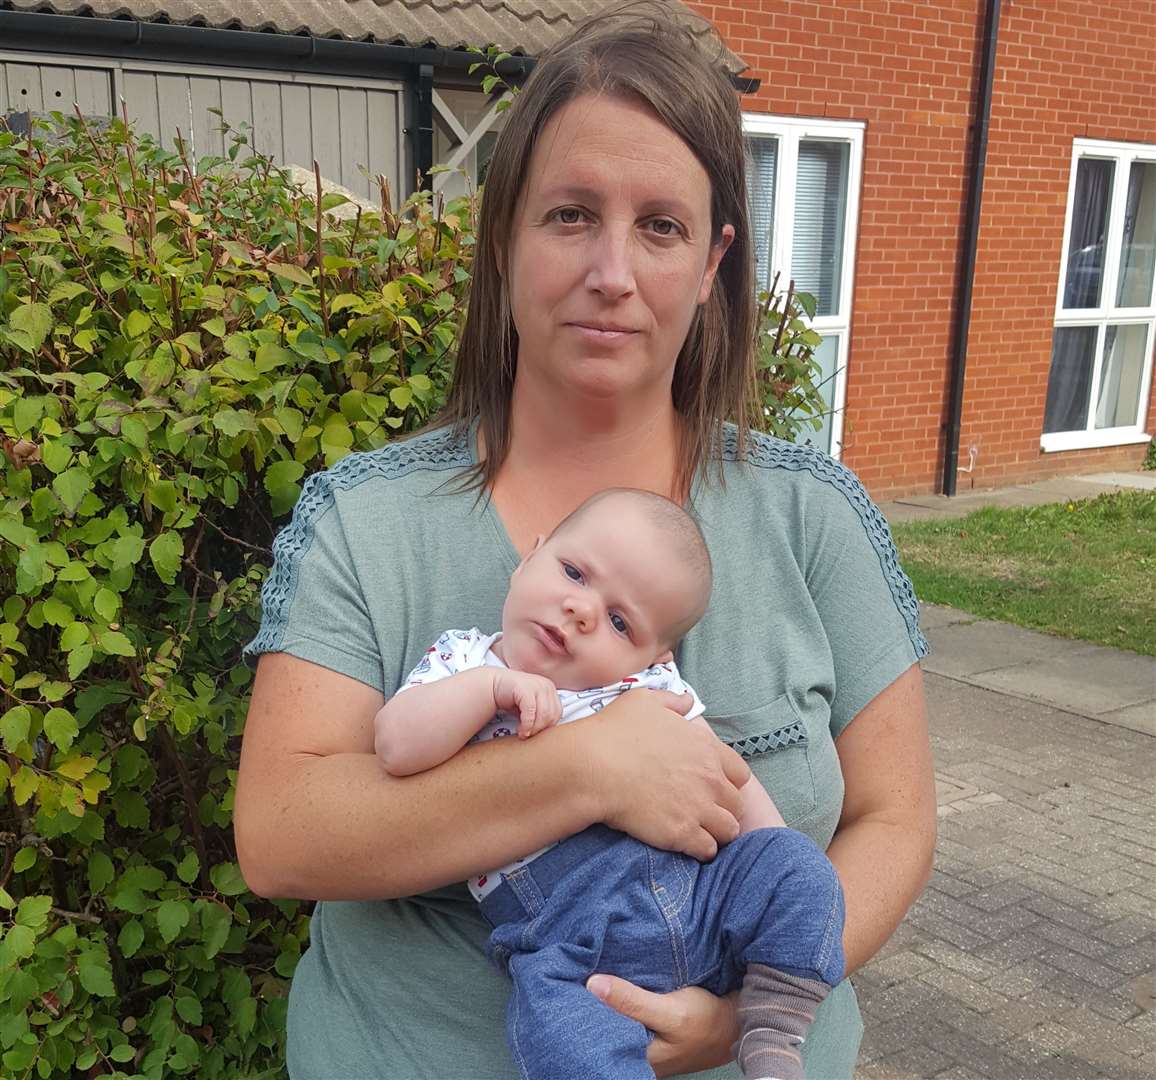 Mum Gayle Shearwood fears she could be made homeless